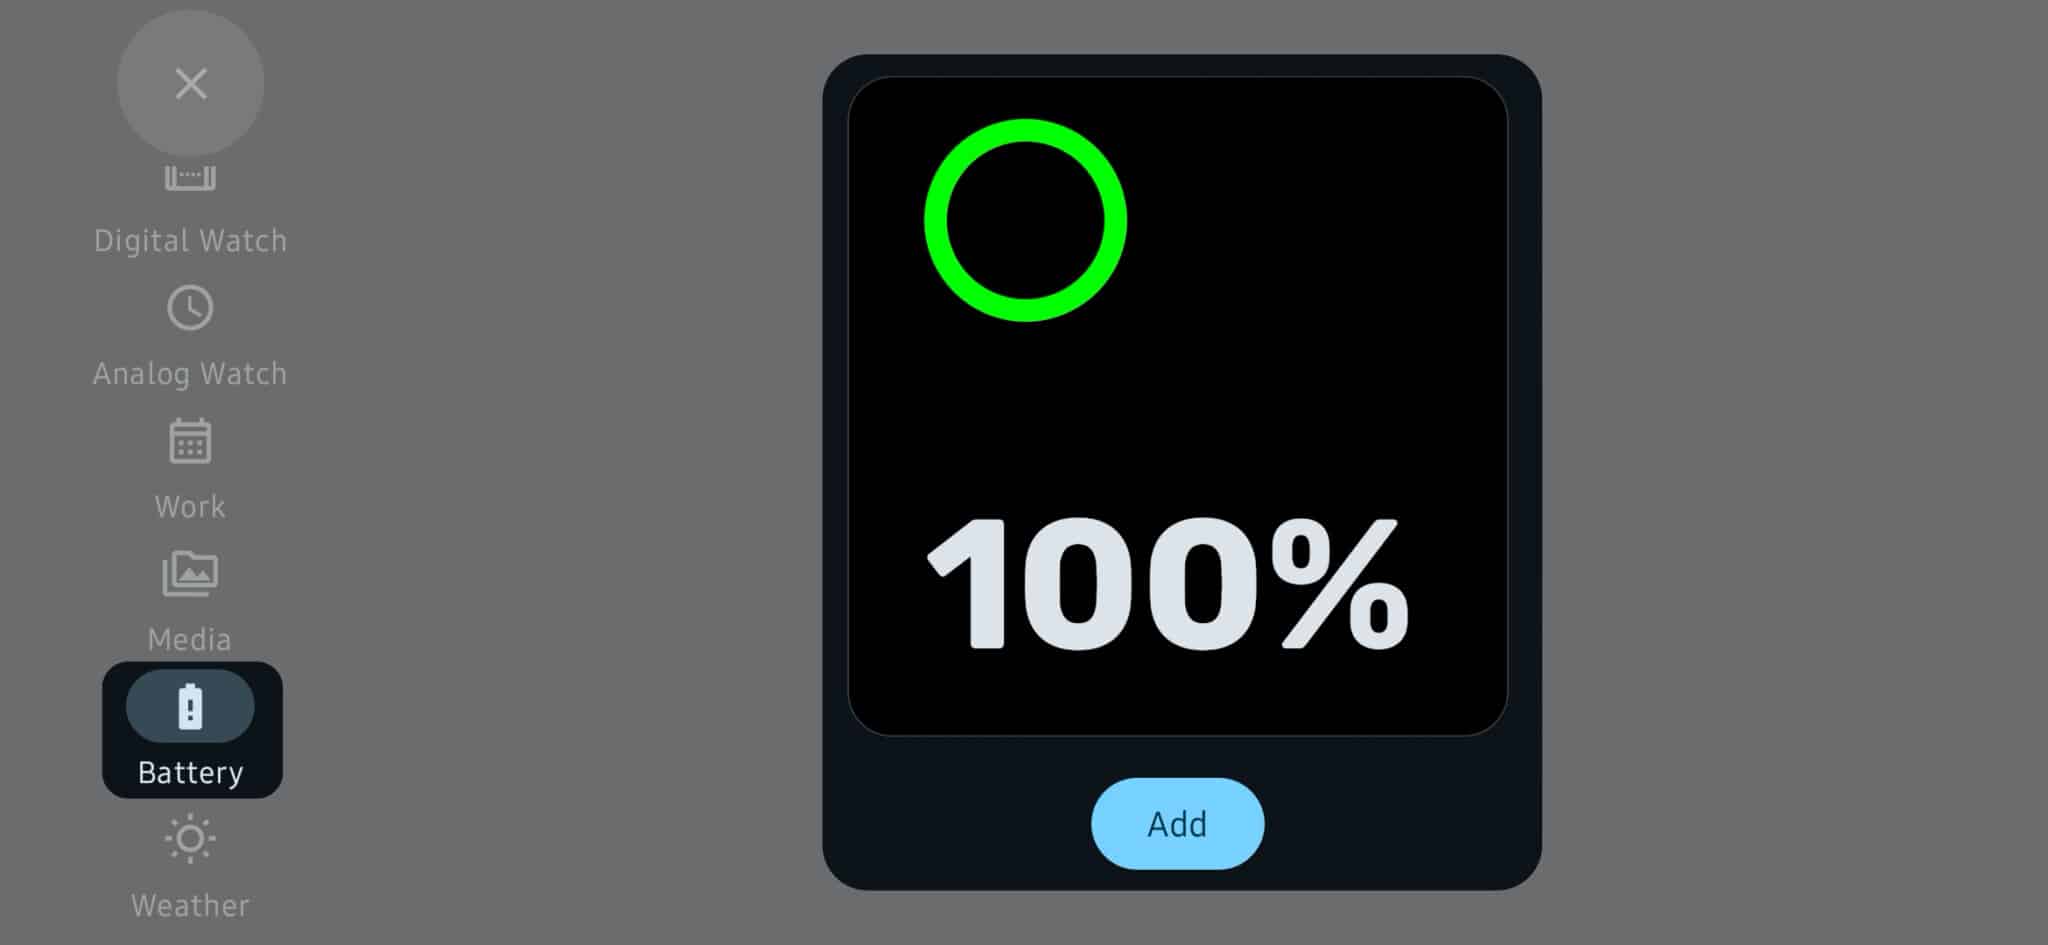 select-battery-widget-on-standby-mode-app-on-android-scaled